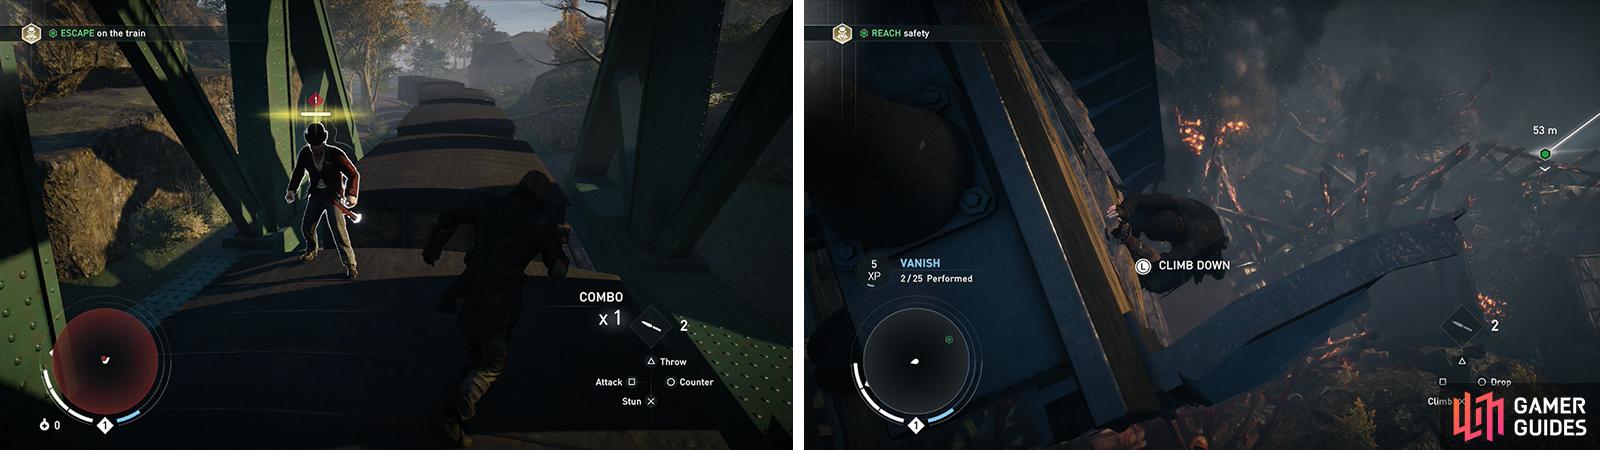 Fight off enemies on the train (left) and then climb down the wreckage (right).